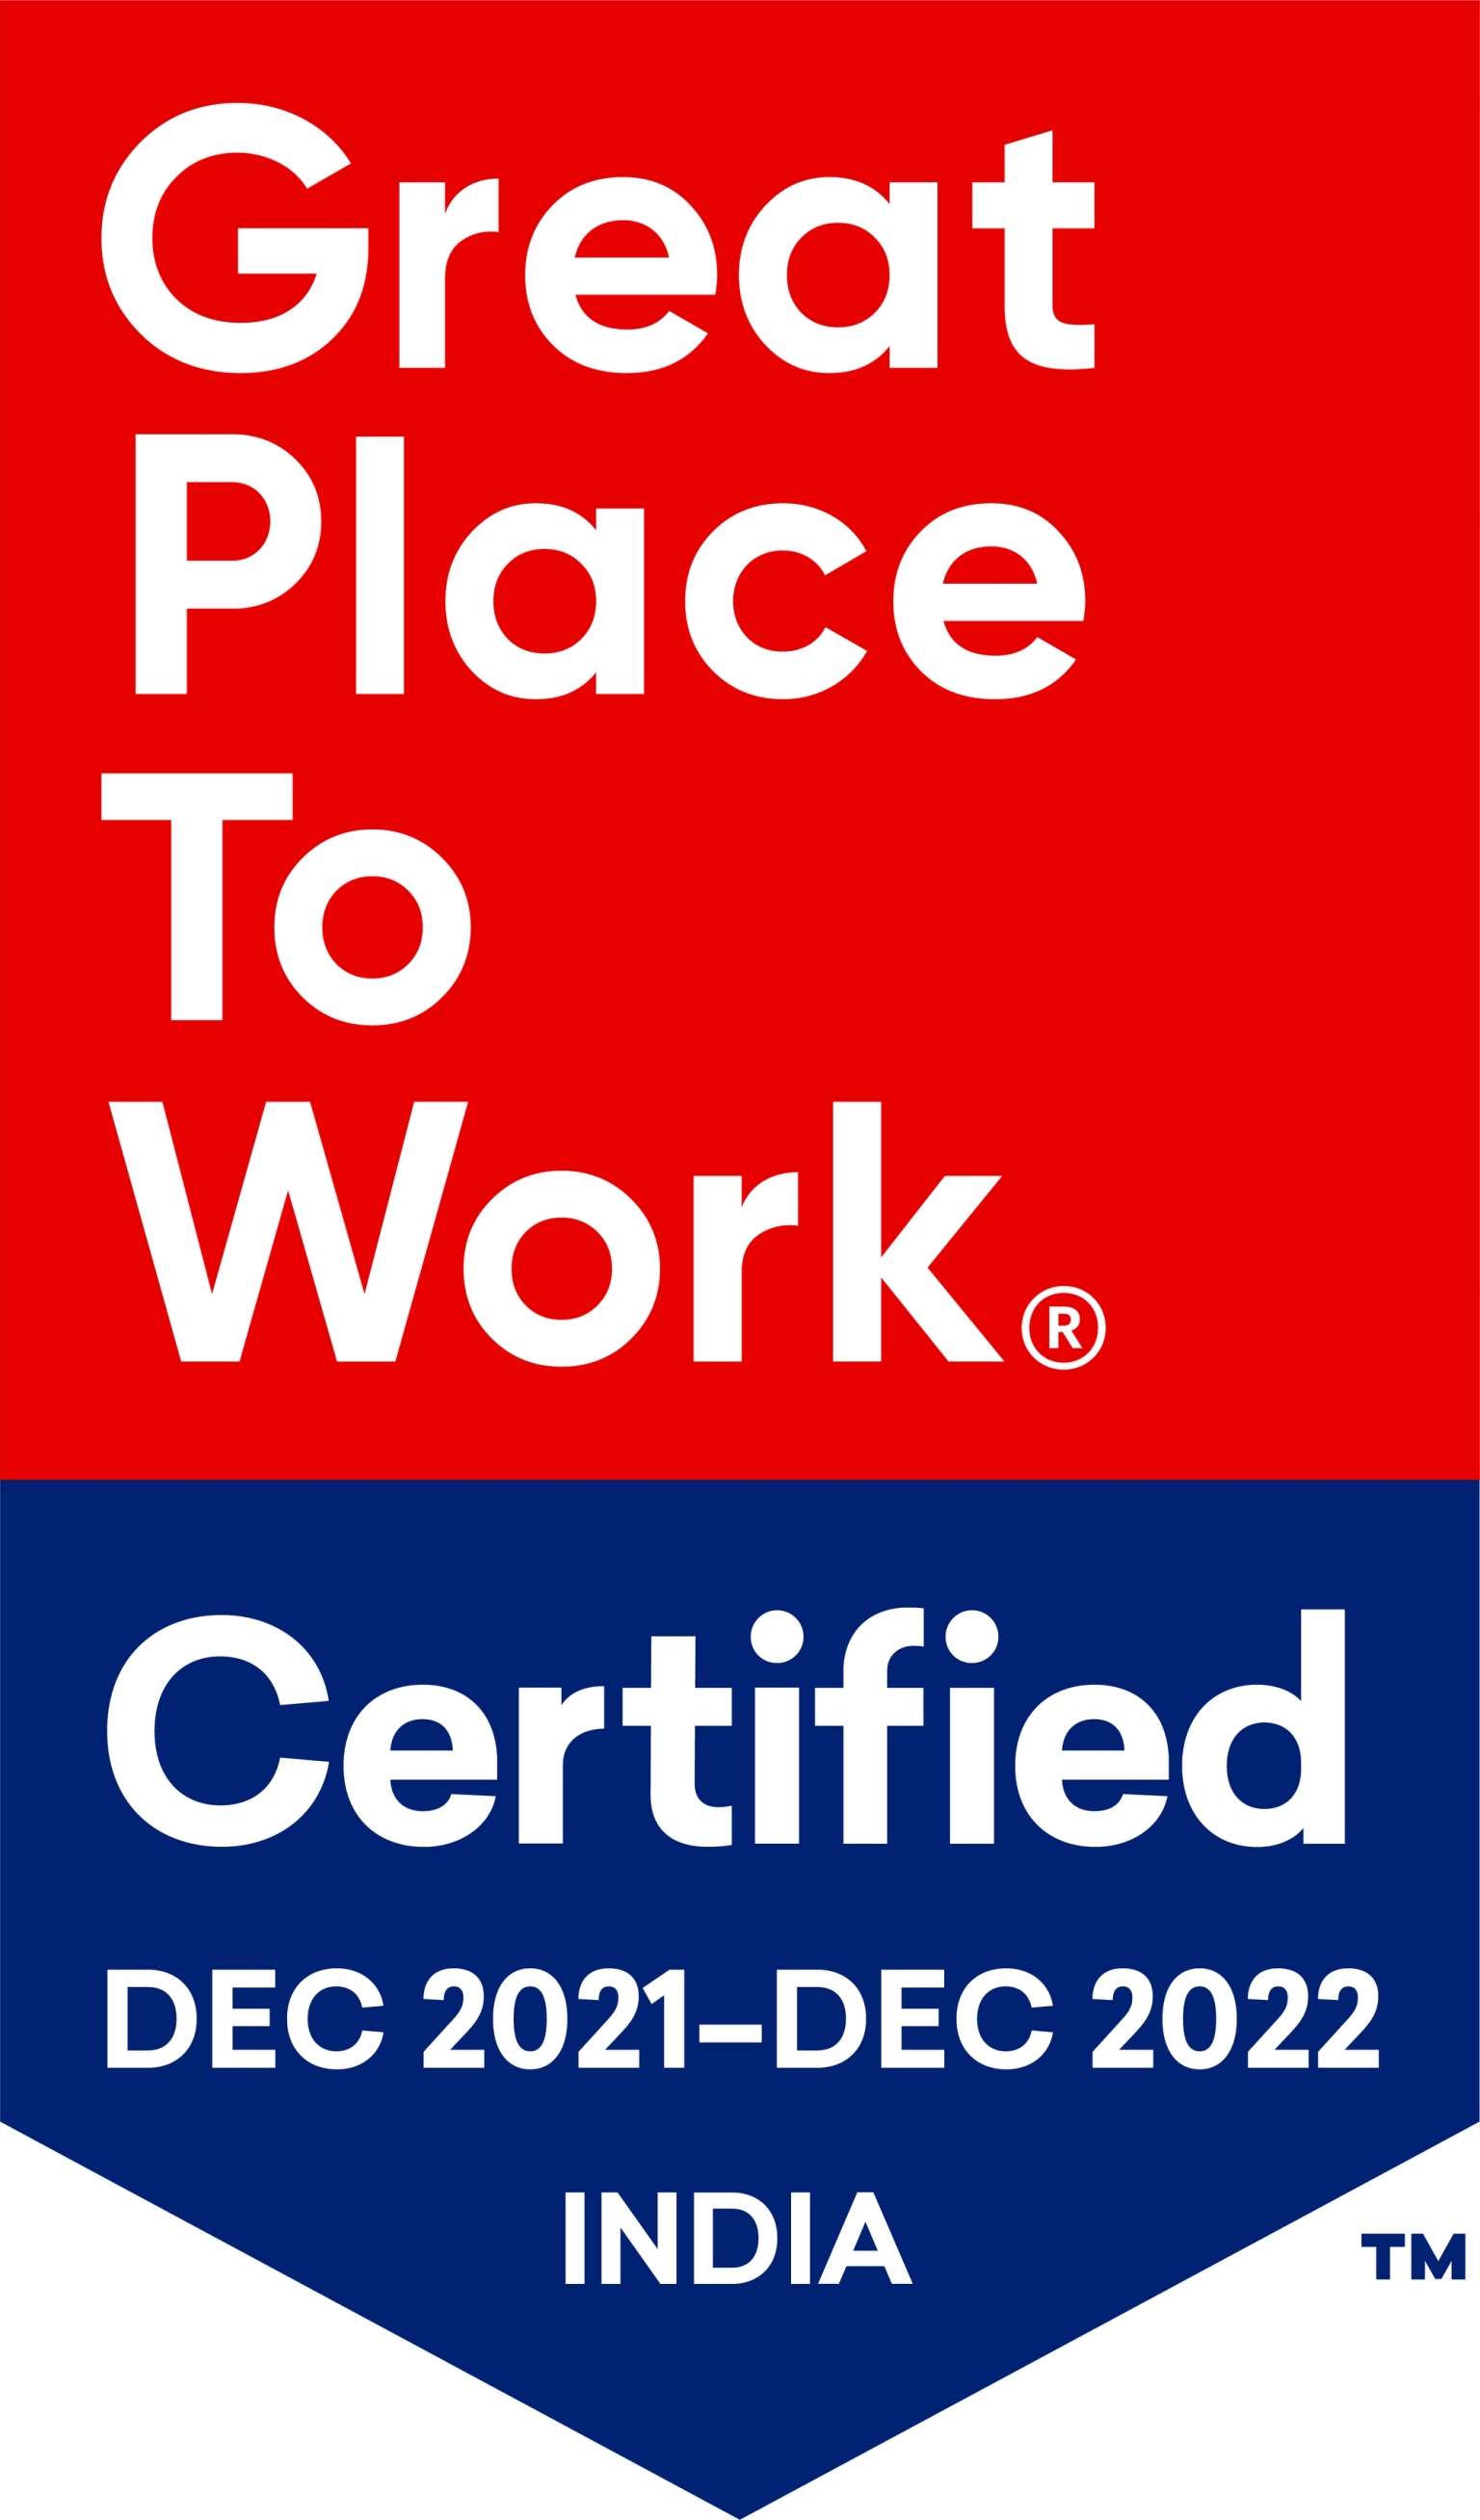 small certification picture with text Great Place to Work